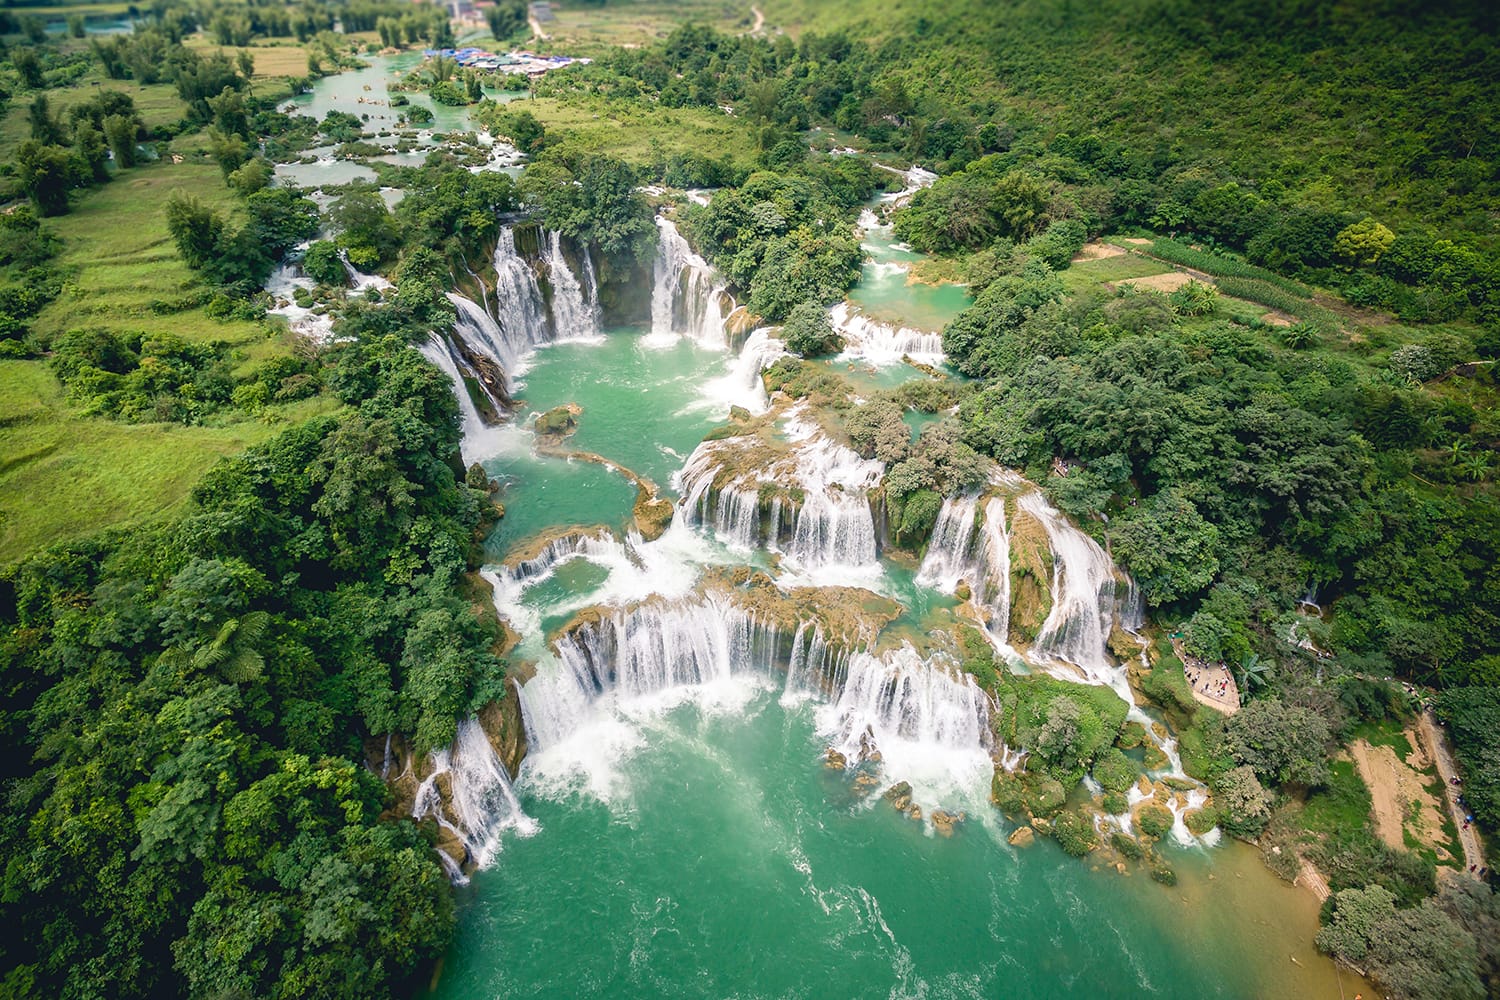 Bangioc - Detian waterfall from drone in Caobang, Vietnam